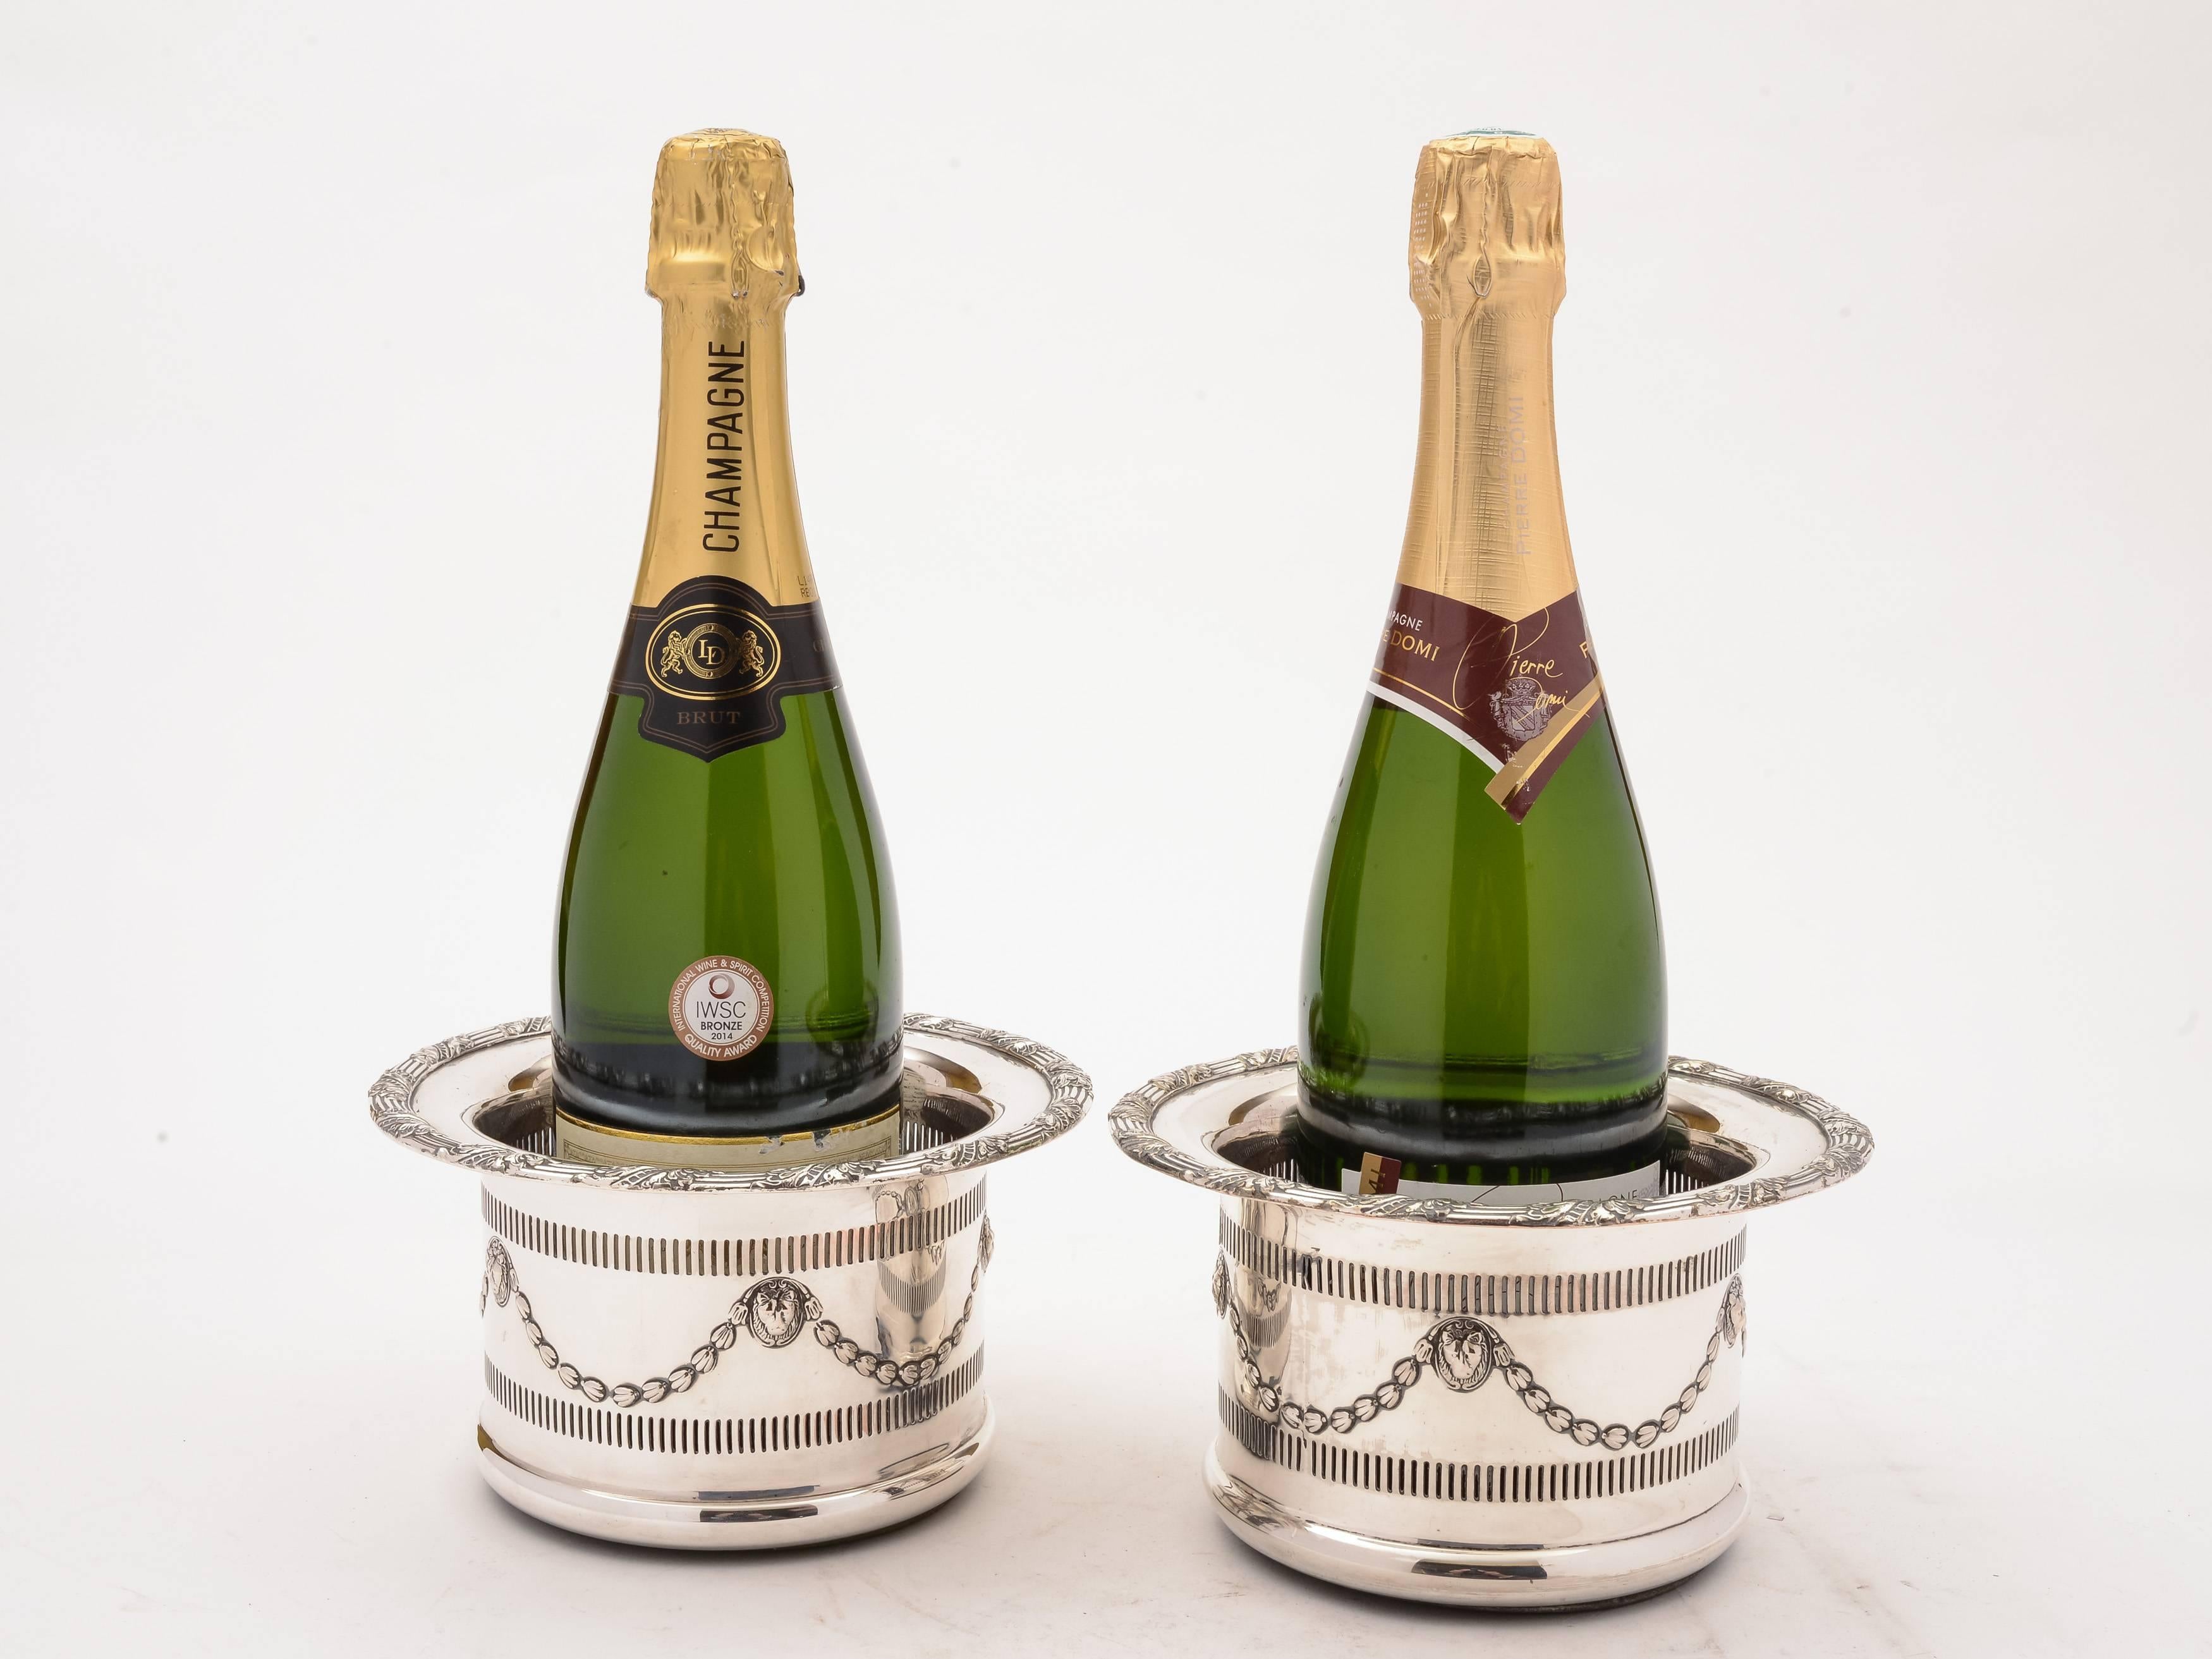 A fabulous pair of English Edwardian silver plated champagne/wine coasters with embossed swag decoration and pierced decoration to body. Both have turned hardwood bases and central buttons, circa 1905.

Measurements:
Height: 4